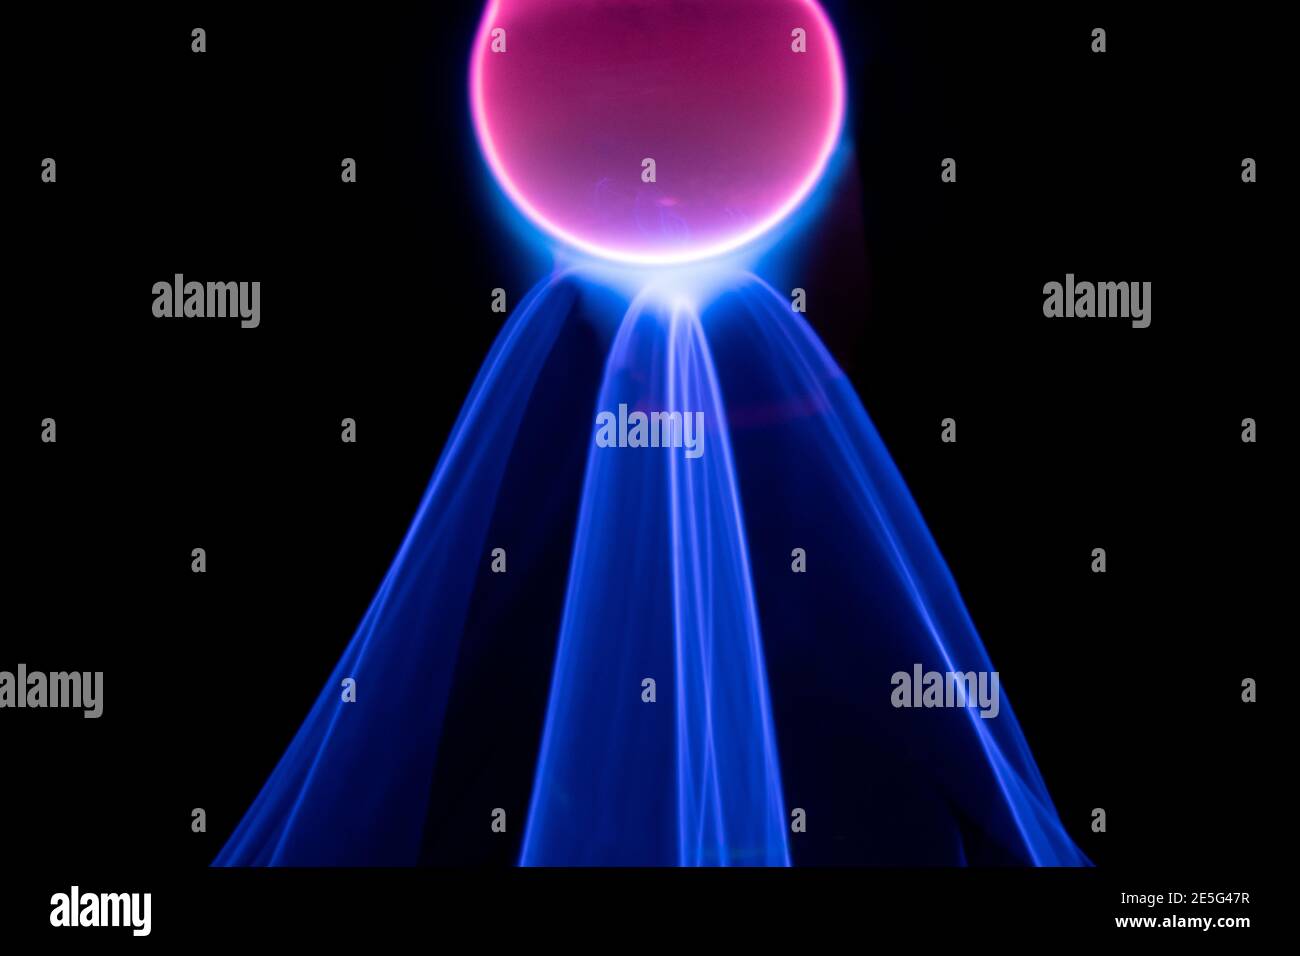 Plasma electric ball lightning lamp. Fascinating space video, close-up of electrical discharges with blue flames on a dark background. Stock Photo